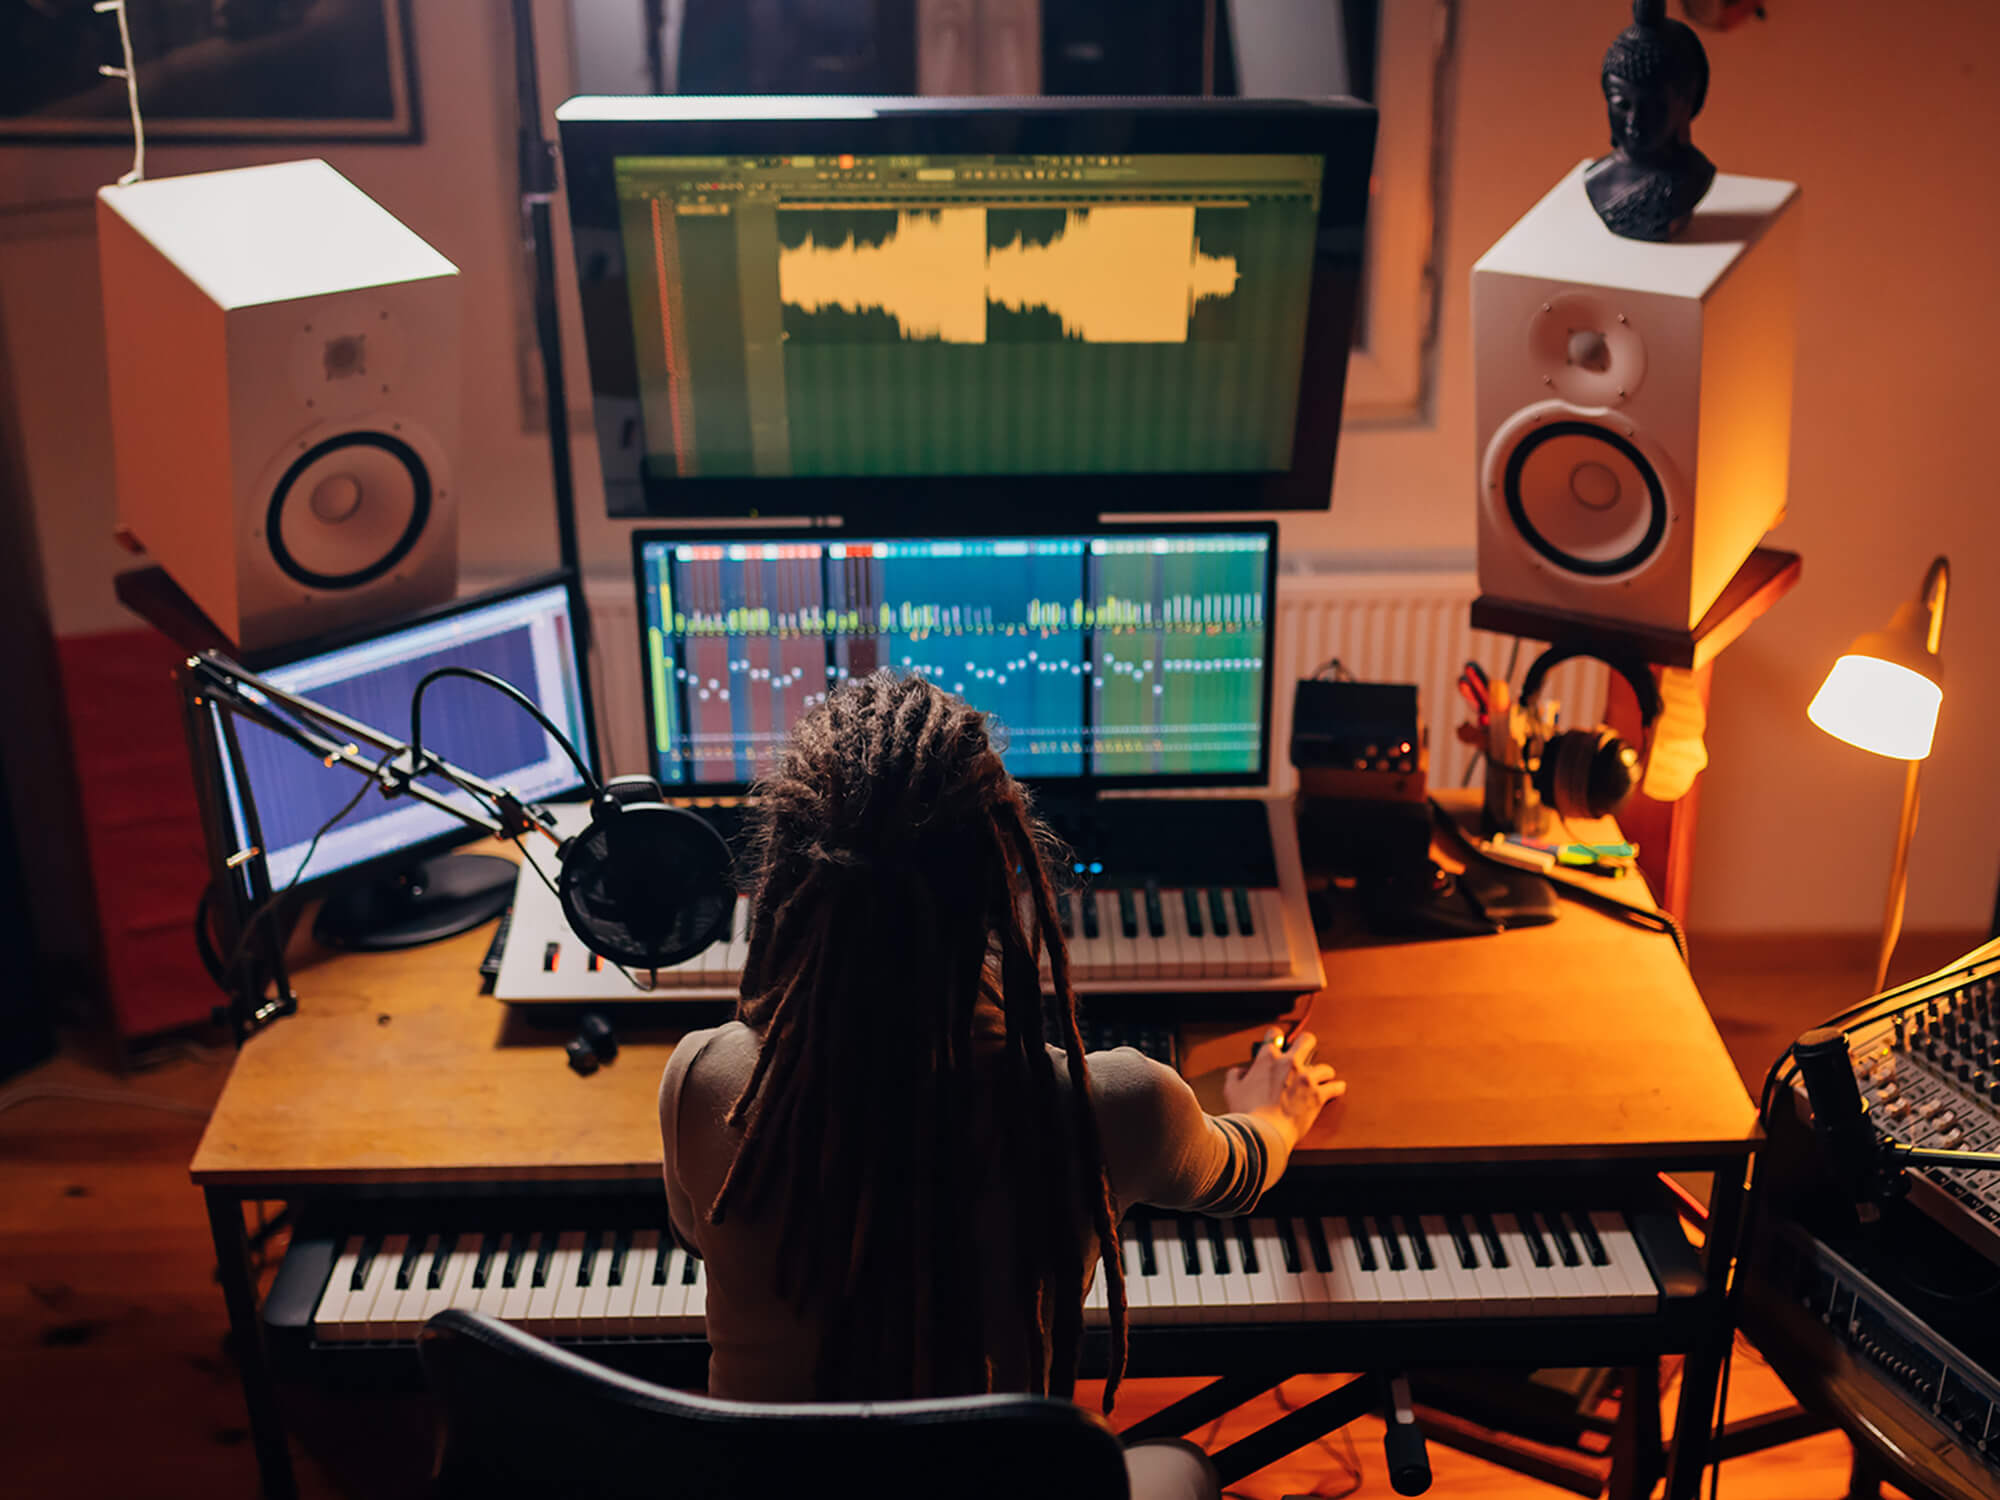 Producer working on music in home studio, photo by Kosamtu via Getty Images